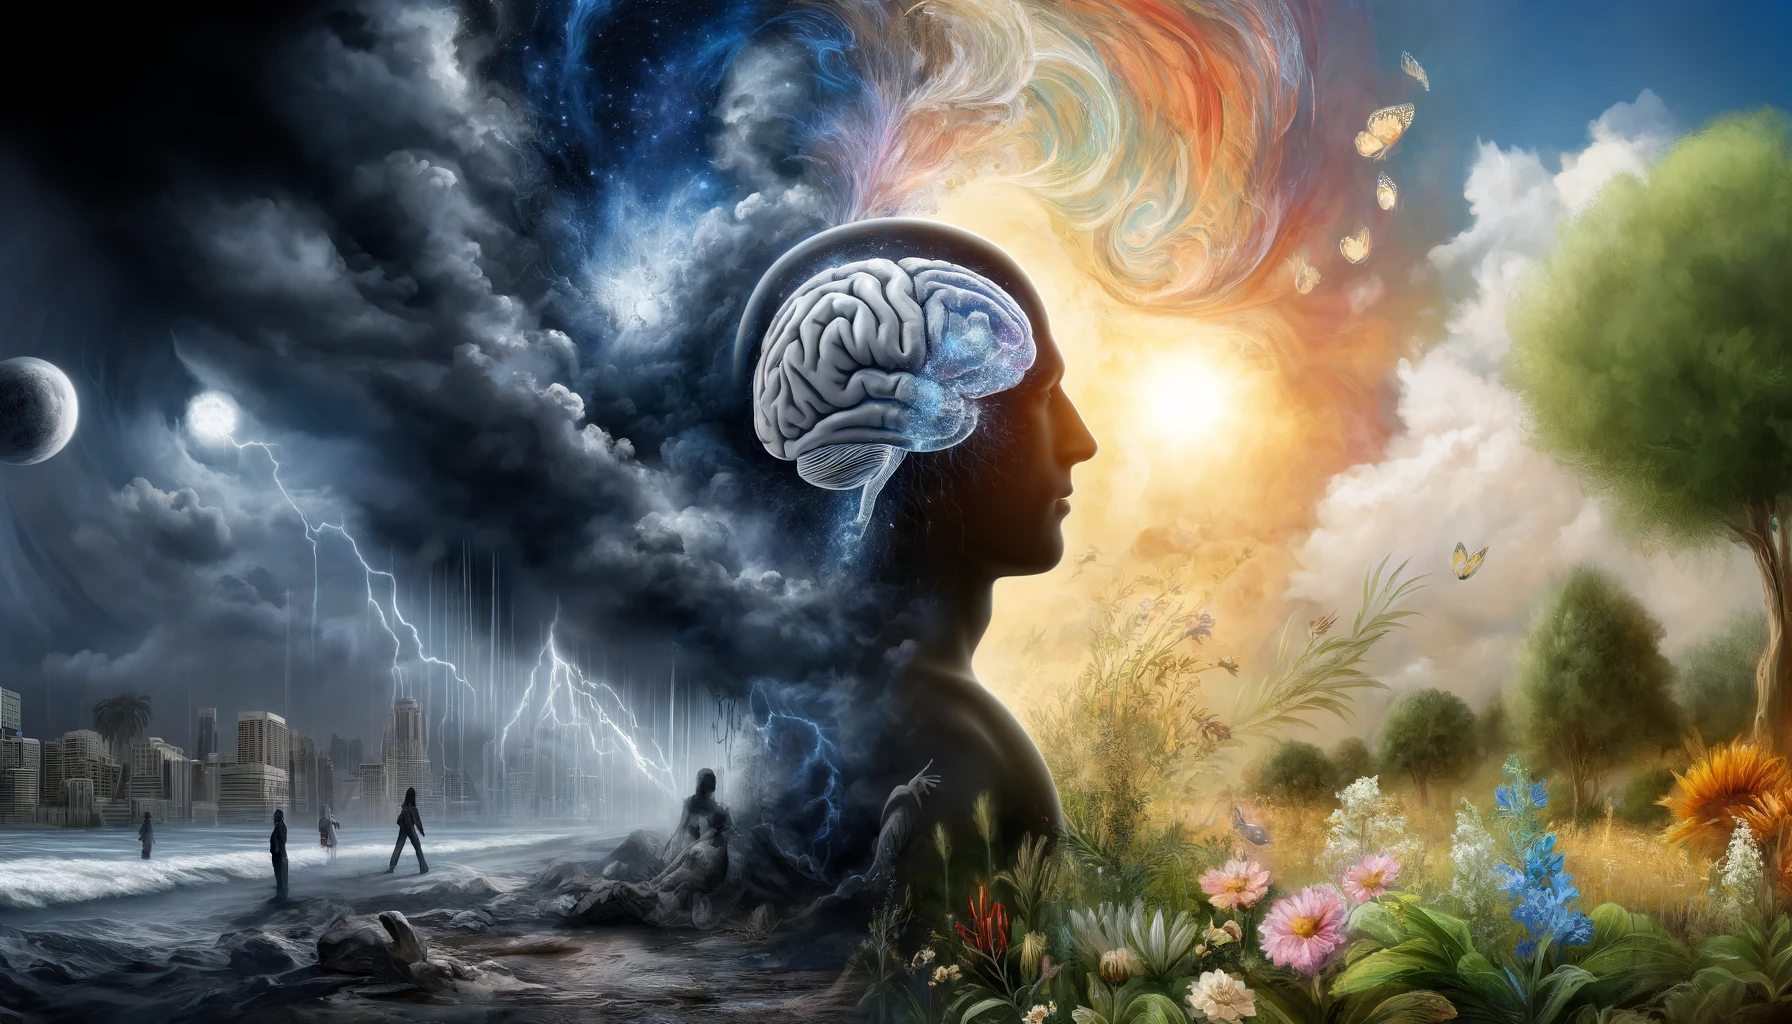 An image depicting the effects of trauma on the mind and body, with a central figure split between stormy clouds and healing light, set against contrasting urban and natural backdrops.